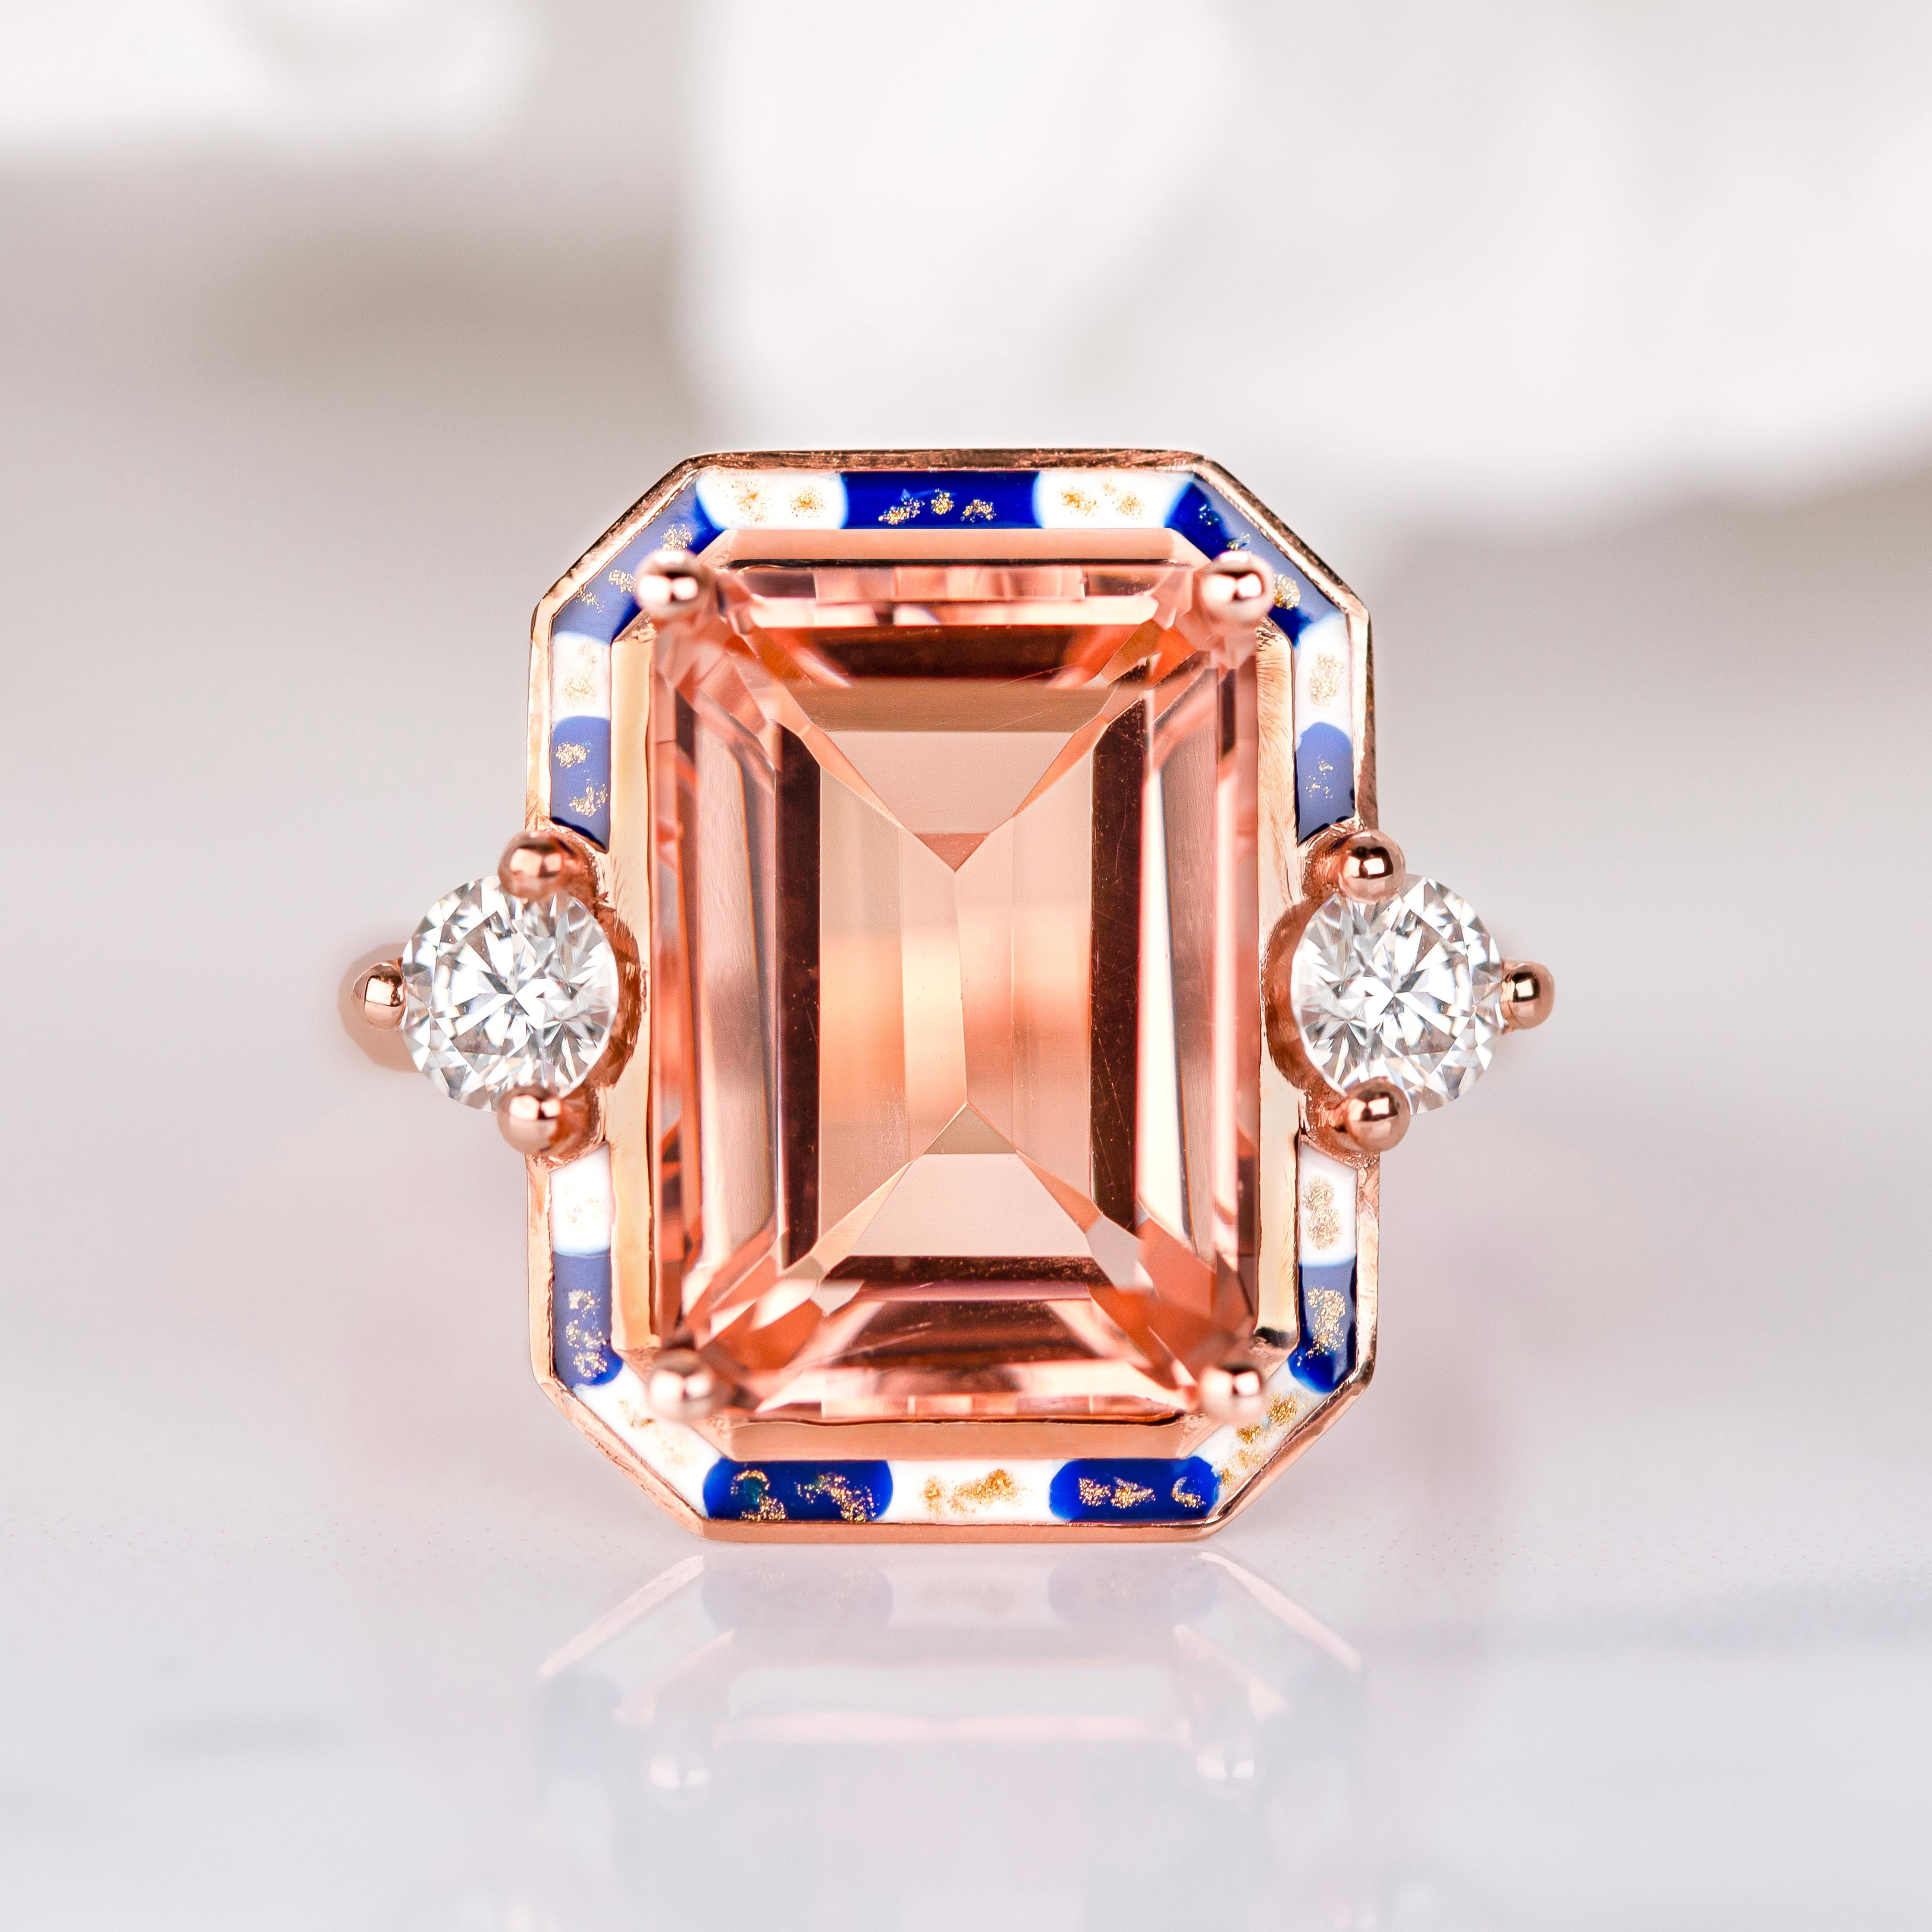 Art Deco Ring, Pink Quartz and Moissanite Stone Ring, 14K Gold Ring

This ring was made with quality materials and excellent handwork. I guarantee the quality assurance of my handwork and materials. It is vital for me that you are totally happy with